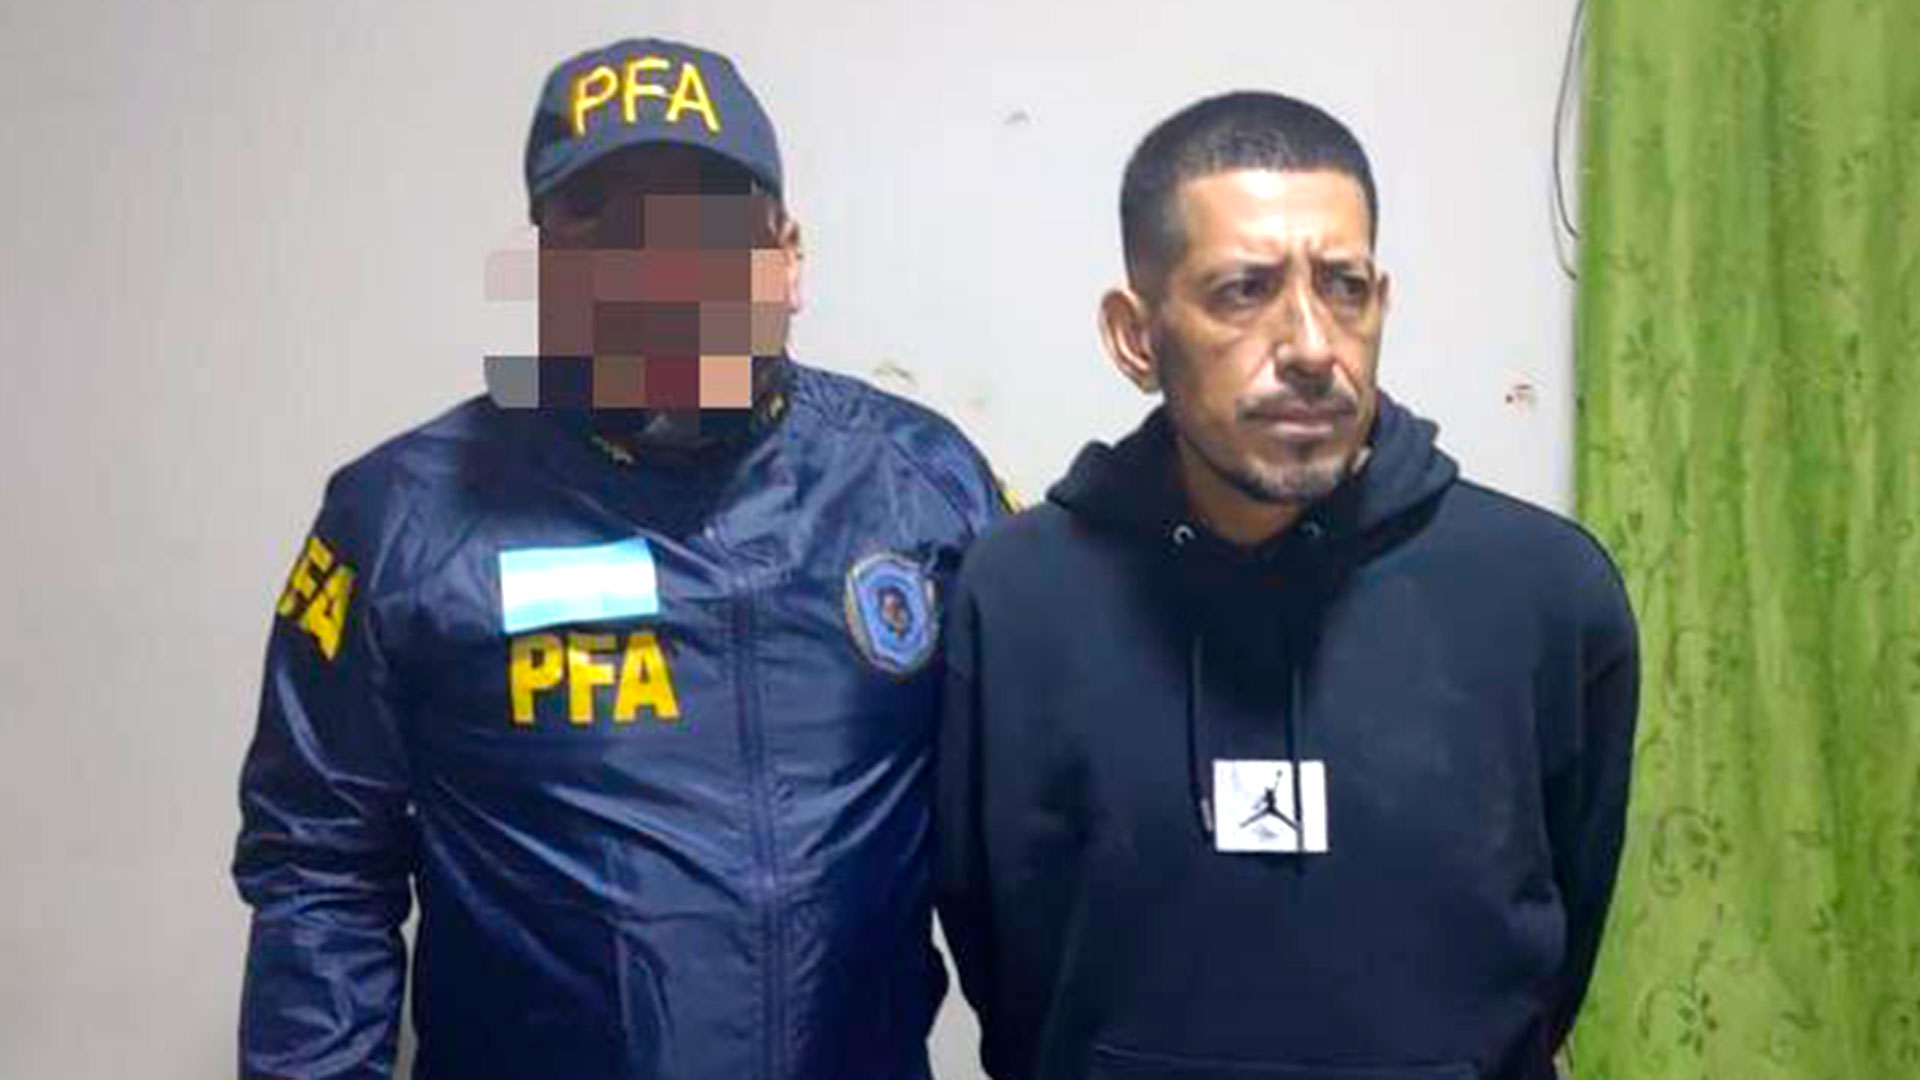 "Dumbo" and one of the PFA officers who traveled to Peru for his arrest.